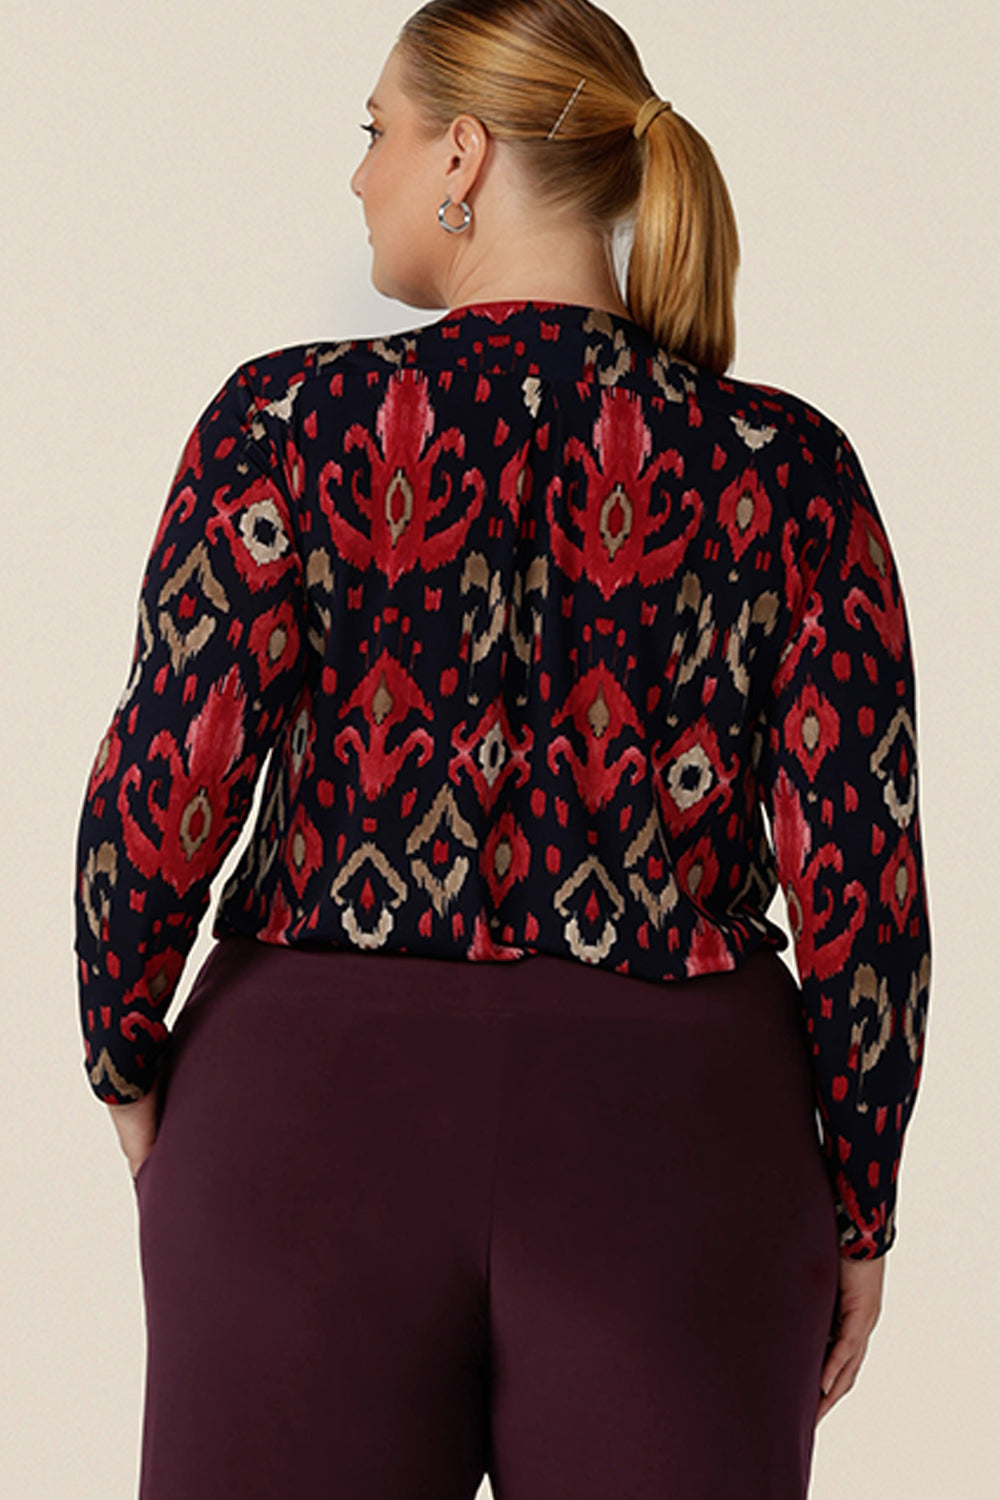 Back view of a great workwear top for women, the Dakota Top in Ikat is a V-neck, long sleeve top in soft stretch jersey. Shown here in a size 18 on a curvy woman, this top is made in Australia in sizes 8 to 24, petite to plus sizes.